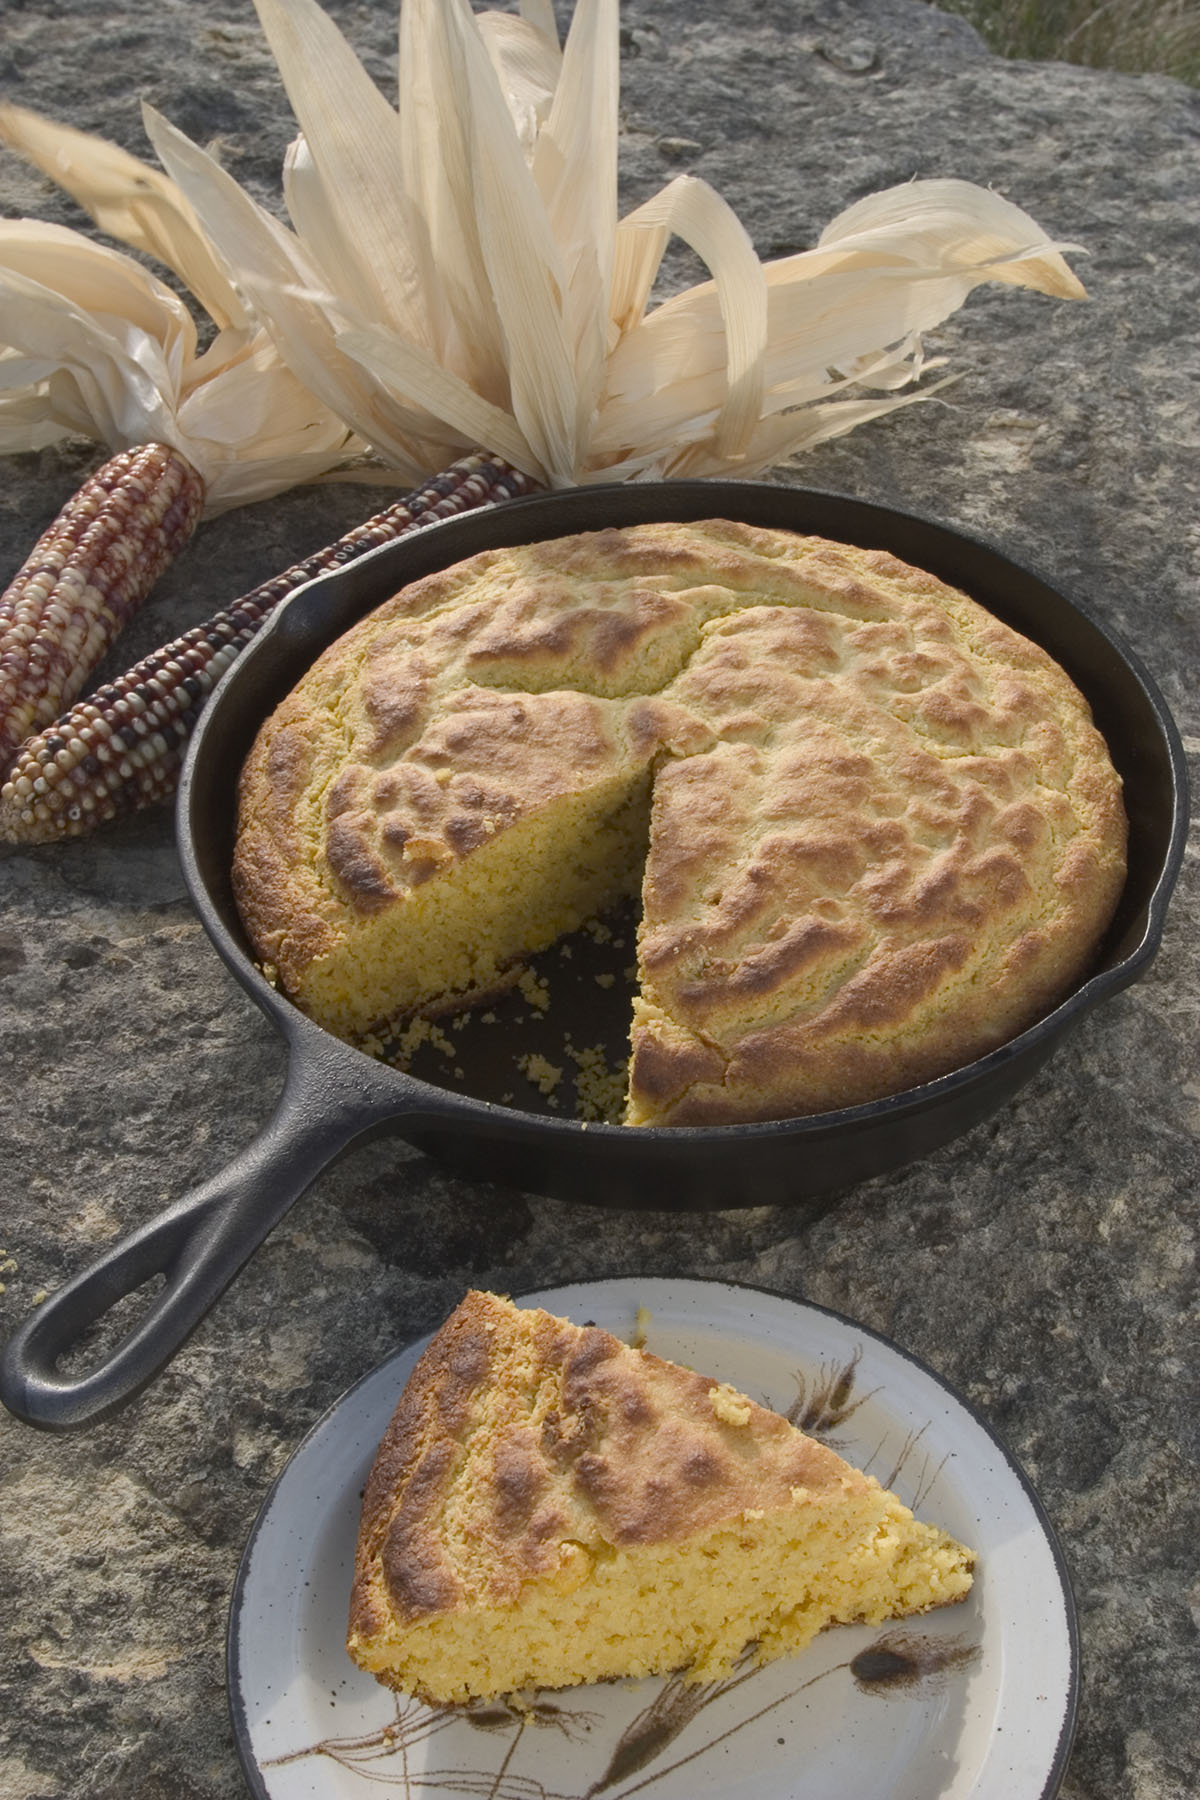 Golden cornbread with a slice missing from a large black cast iron skillet. Dried corn husks are visible just out of frame on a rocky background.